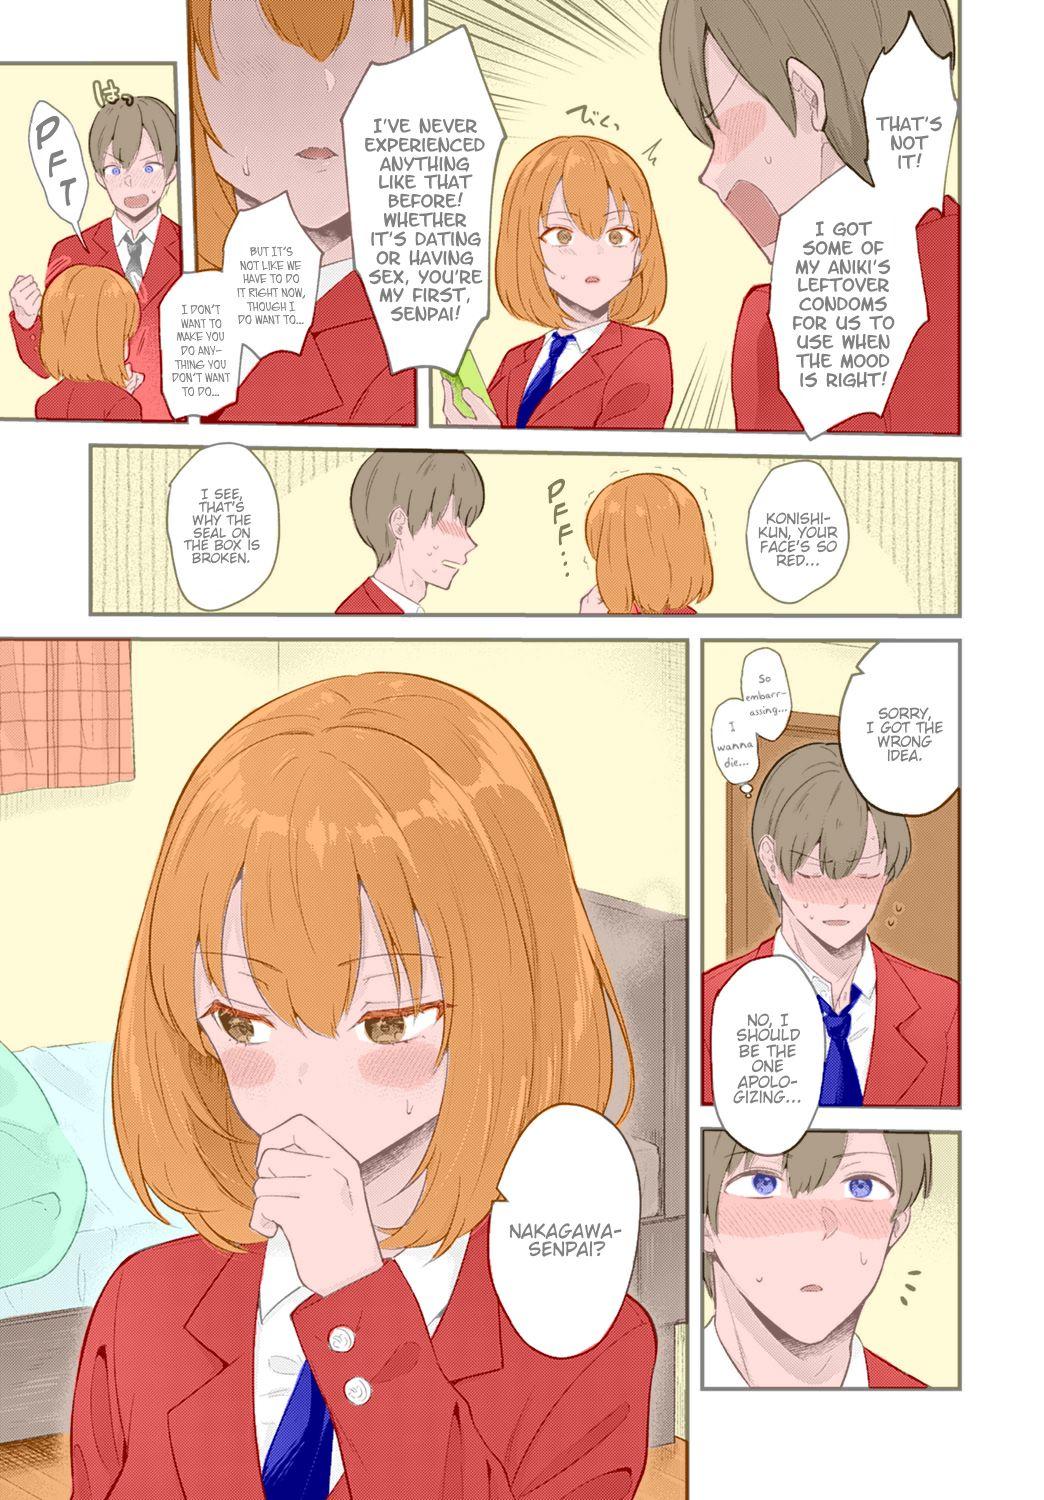 Esposa Kanojo Face | Girlfriend Face Ink - Page 5